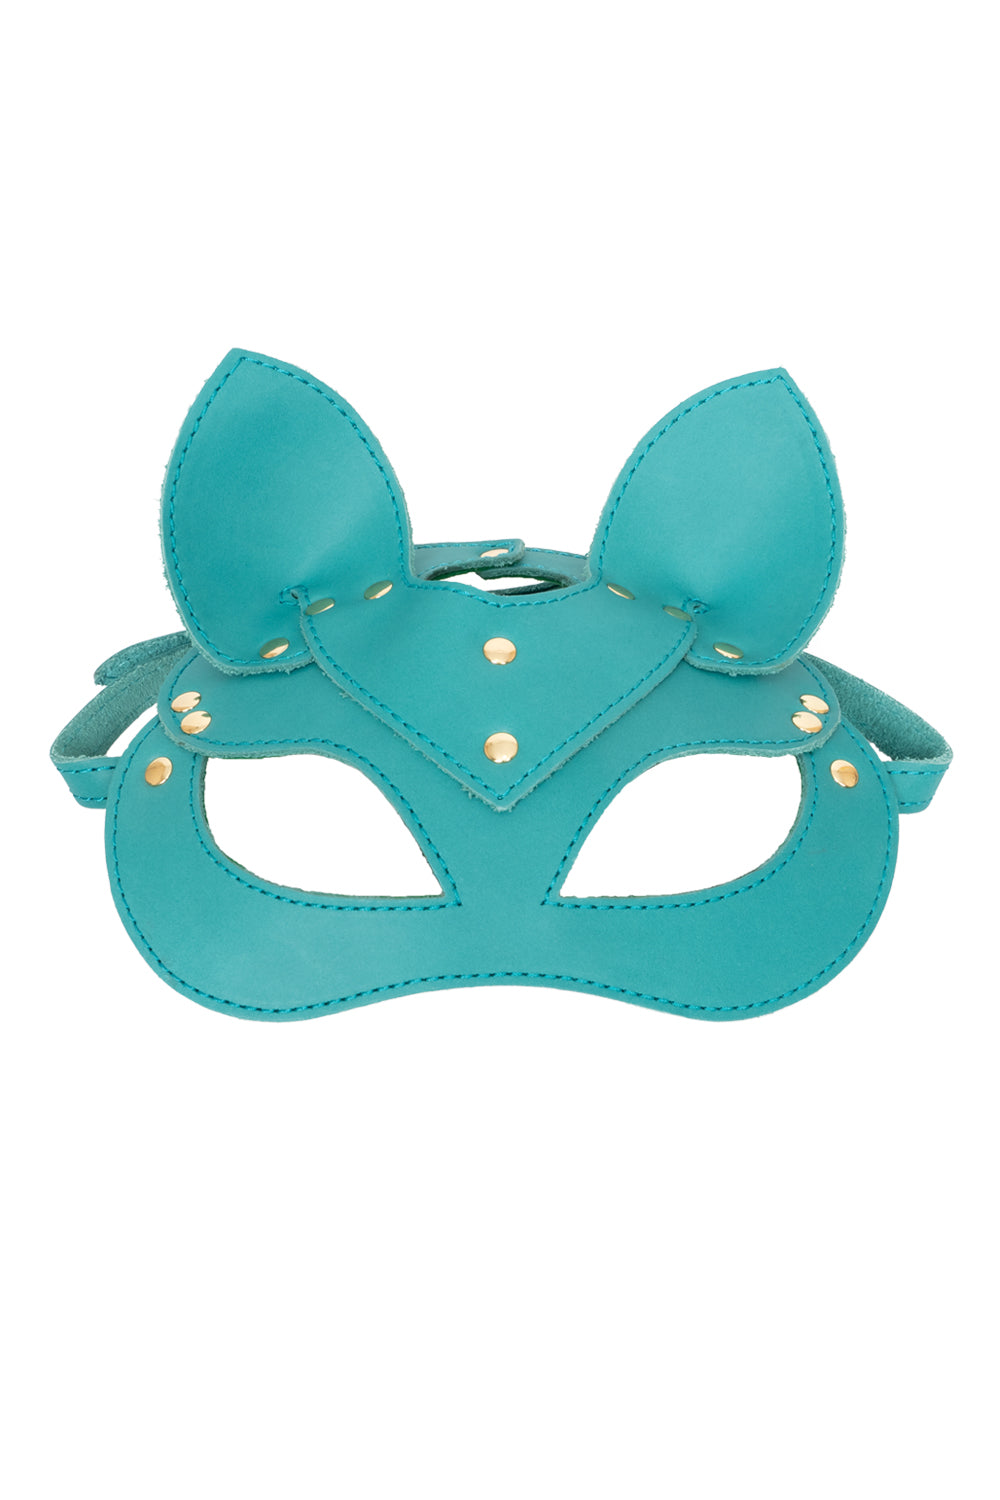 CRAZY HORSE Leather cat mask. 10 colors